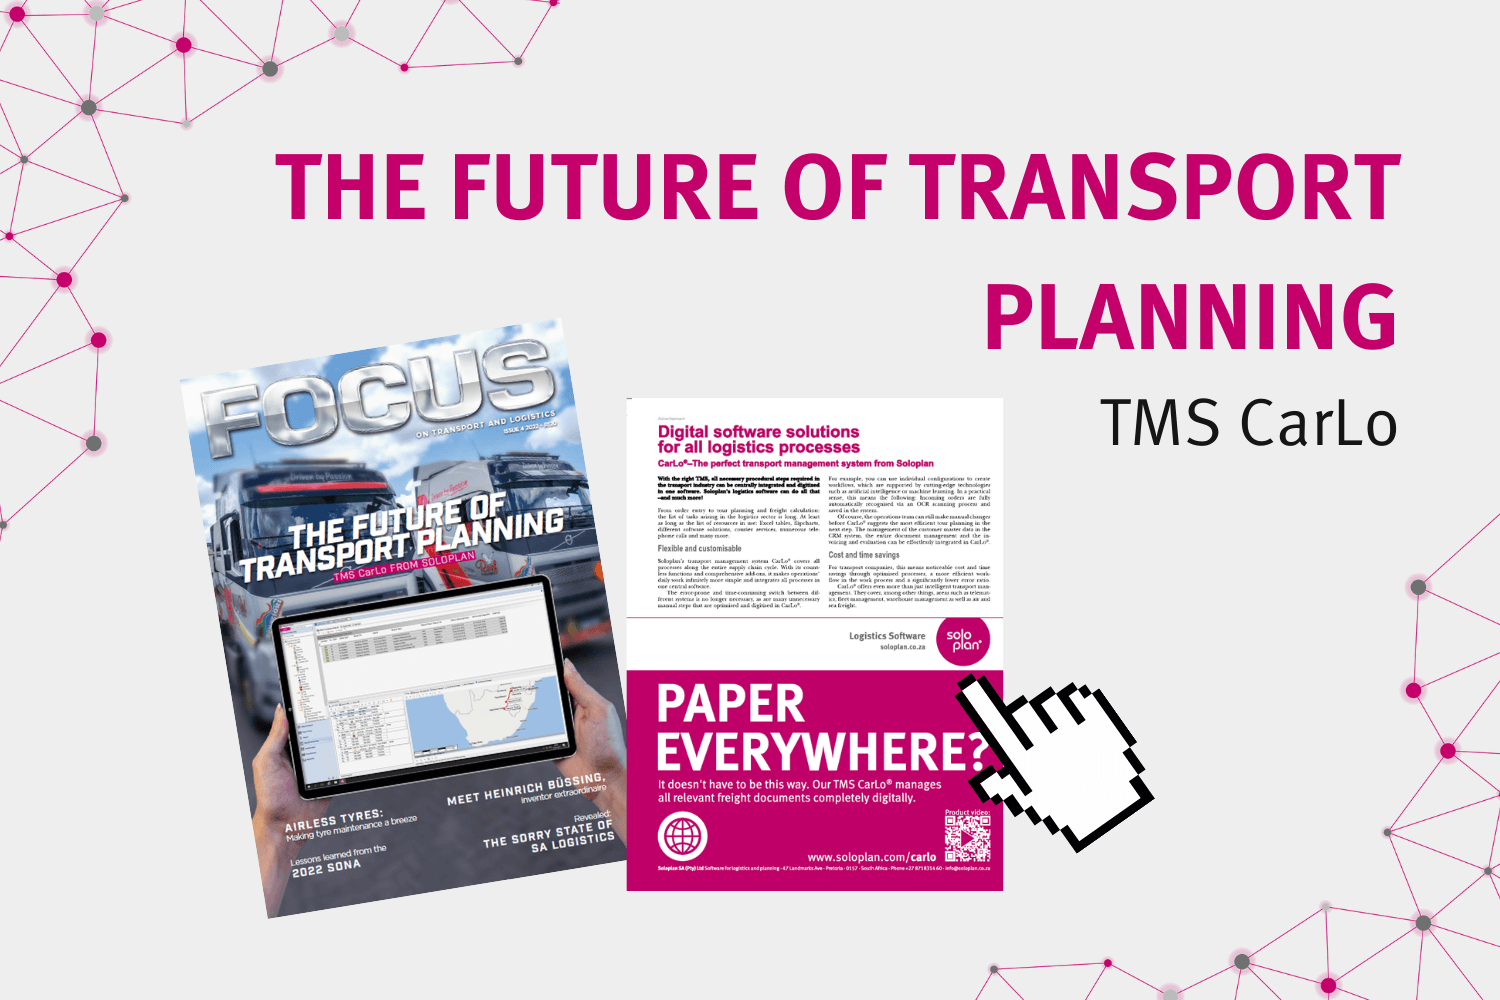 CarLo – the future of transport planning